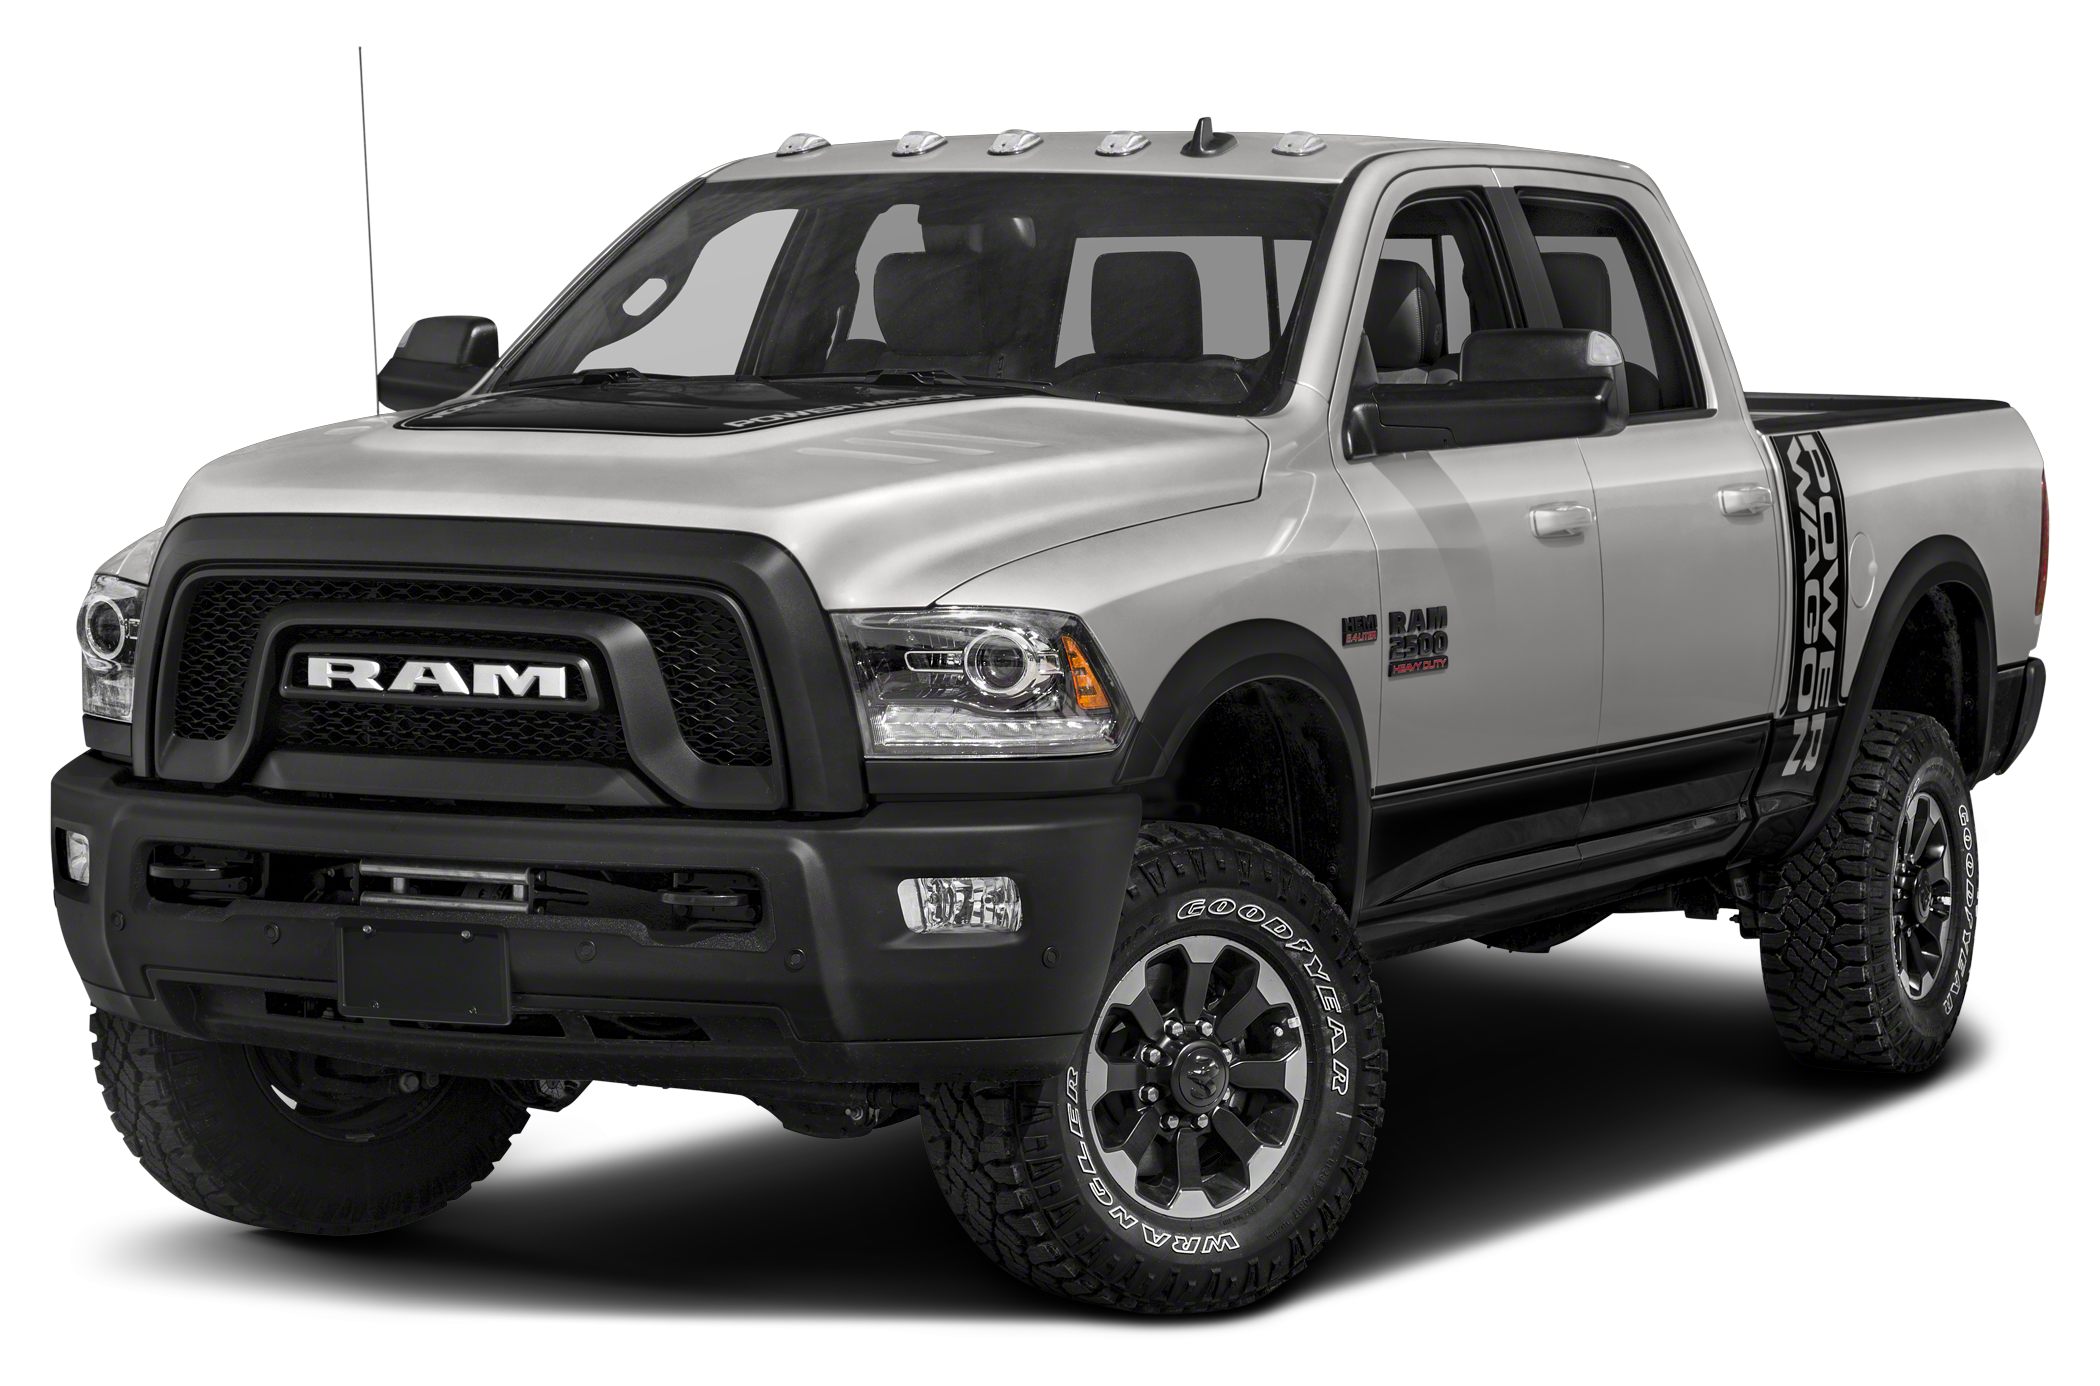 2018 Ram 2500 Power Wagon 4x4 Crew Cab 149 In Wb Pictures